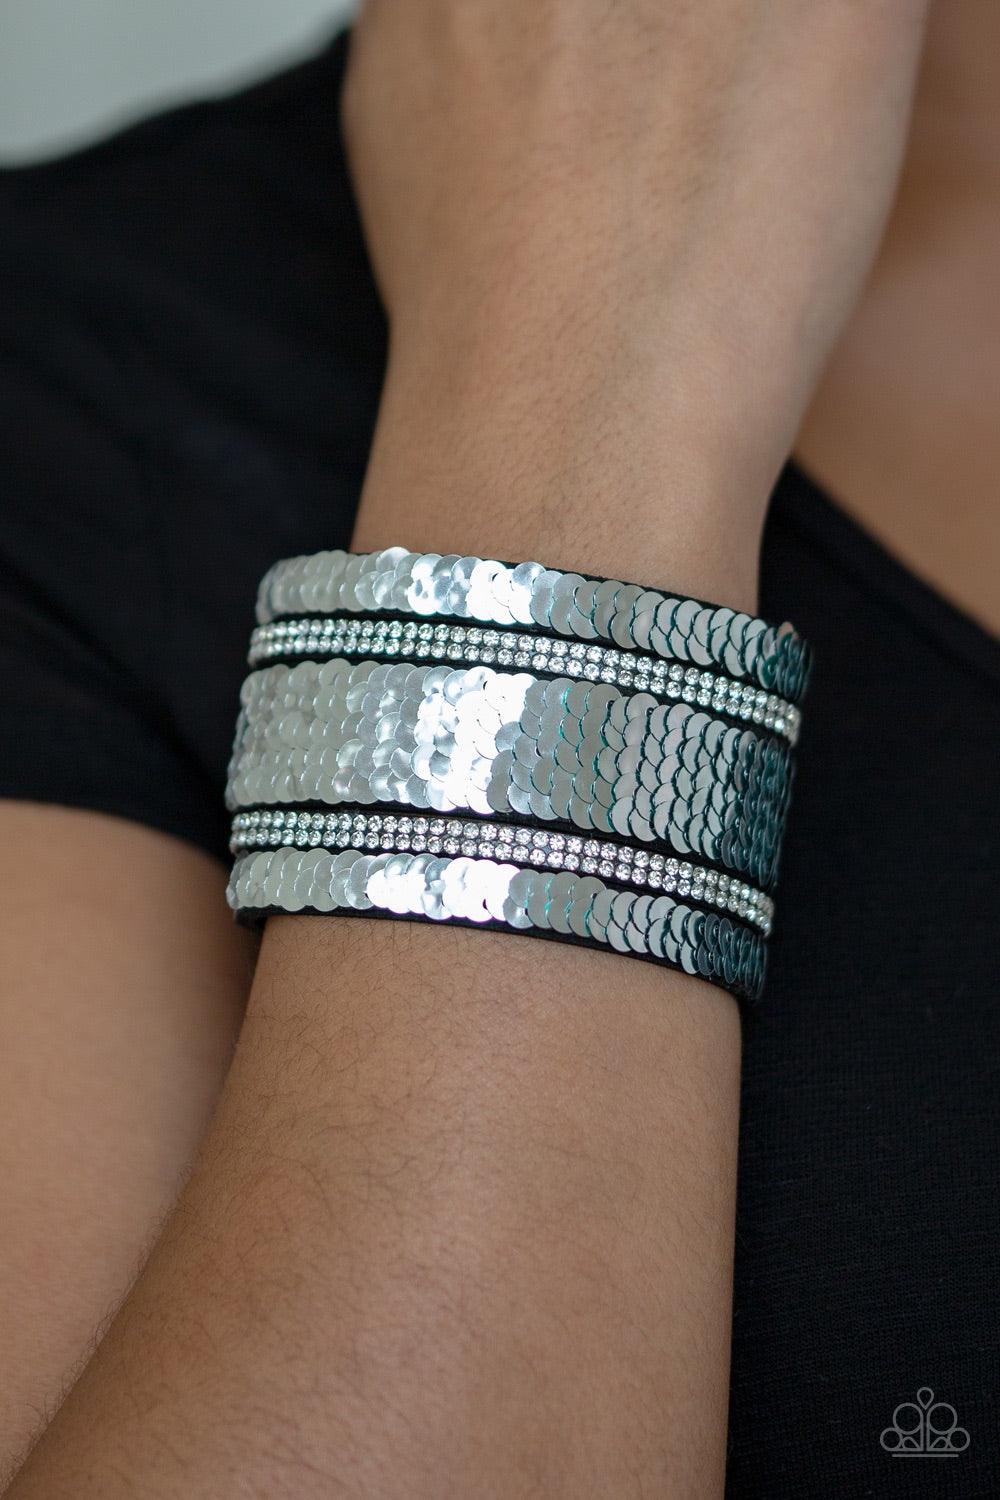 Paparazzi Accessories Mermaid Service - Green Infused with strands of blinding white rhinestones, row after row of shimmery sequins are stitched across the front of a spliced black suede band. Bracelet features reversible sequins that change from silver t